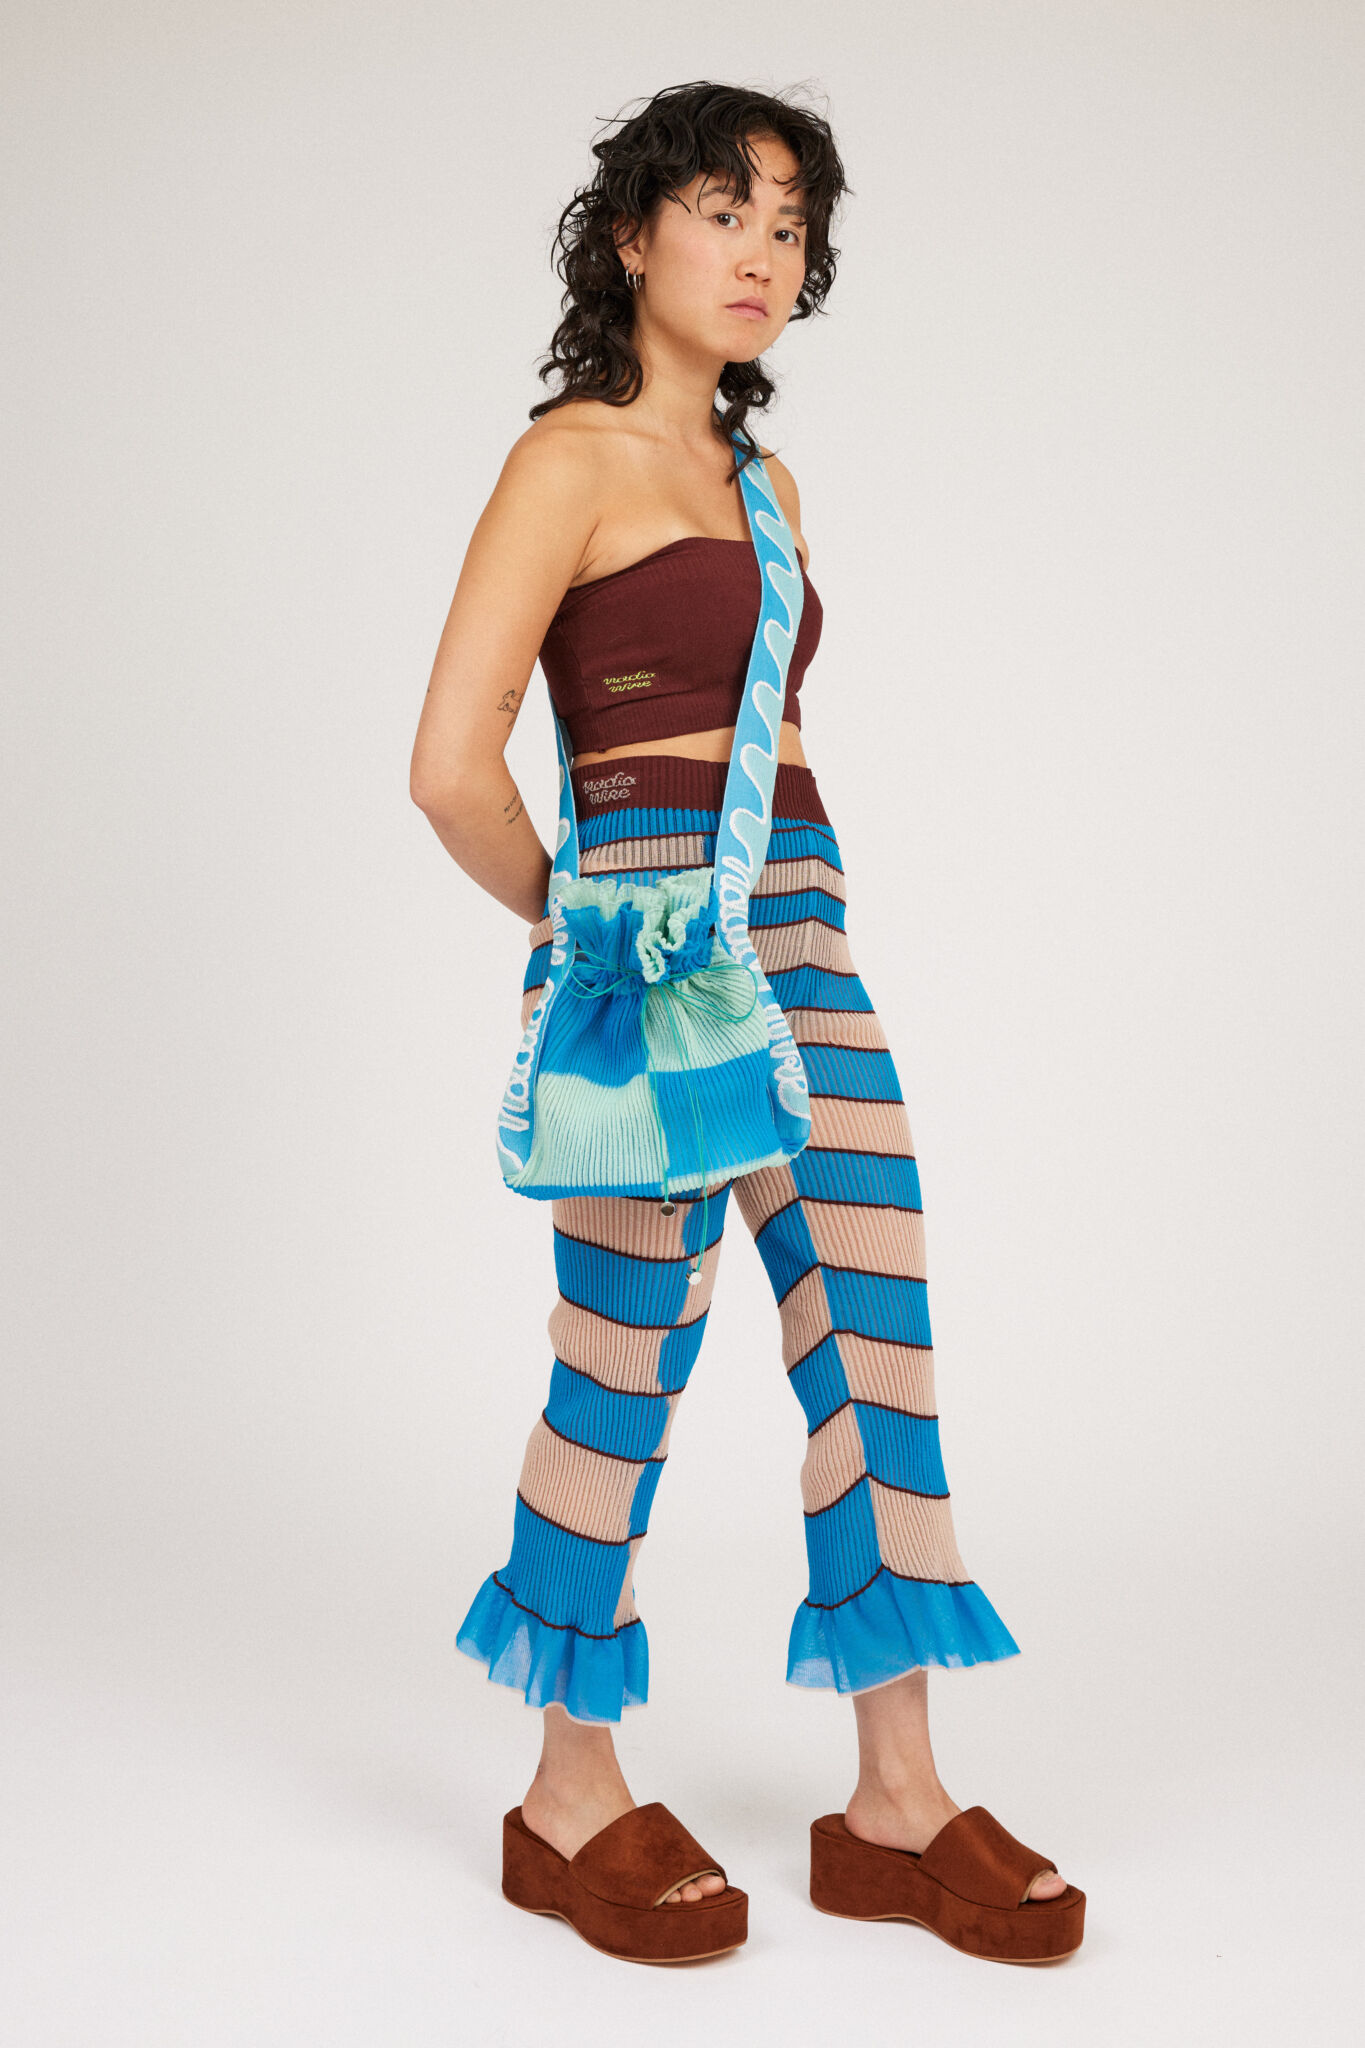 Twisted Frill Bag in blue and mint green is a knitted transparent crossbody cinch bag in twisted chess stripes. Detailed with ruffles, a logo jacquard strap and an adjustable opening.